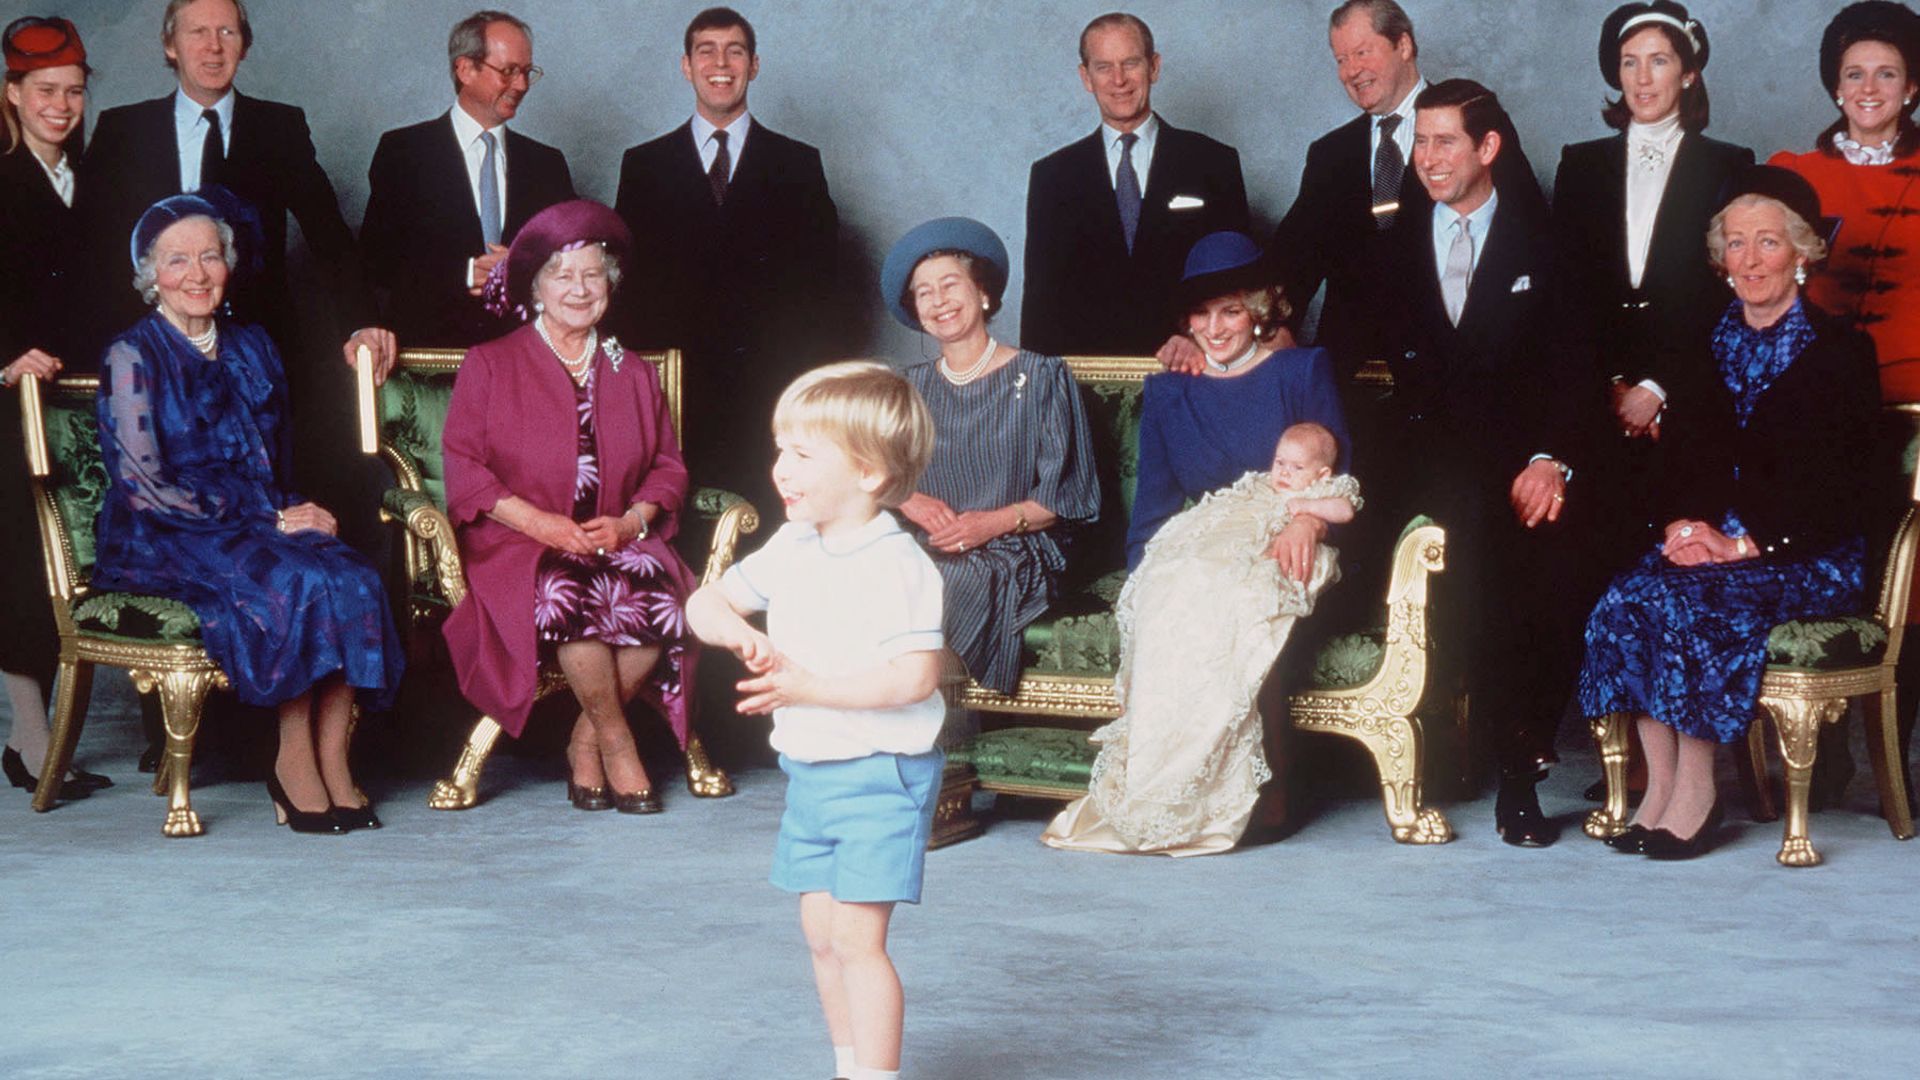 A young Prince William in the centre of the room surrounded by other members of the royal family